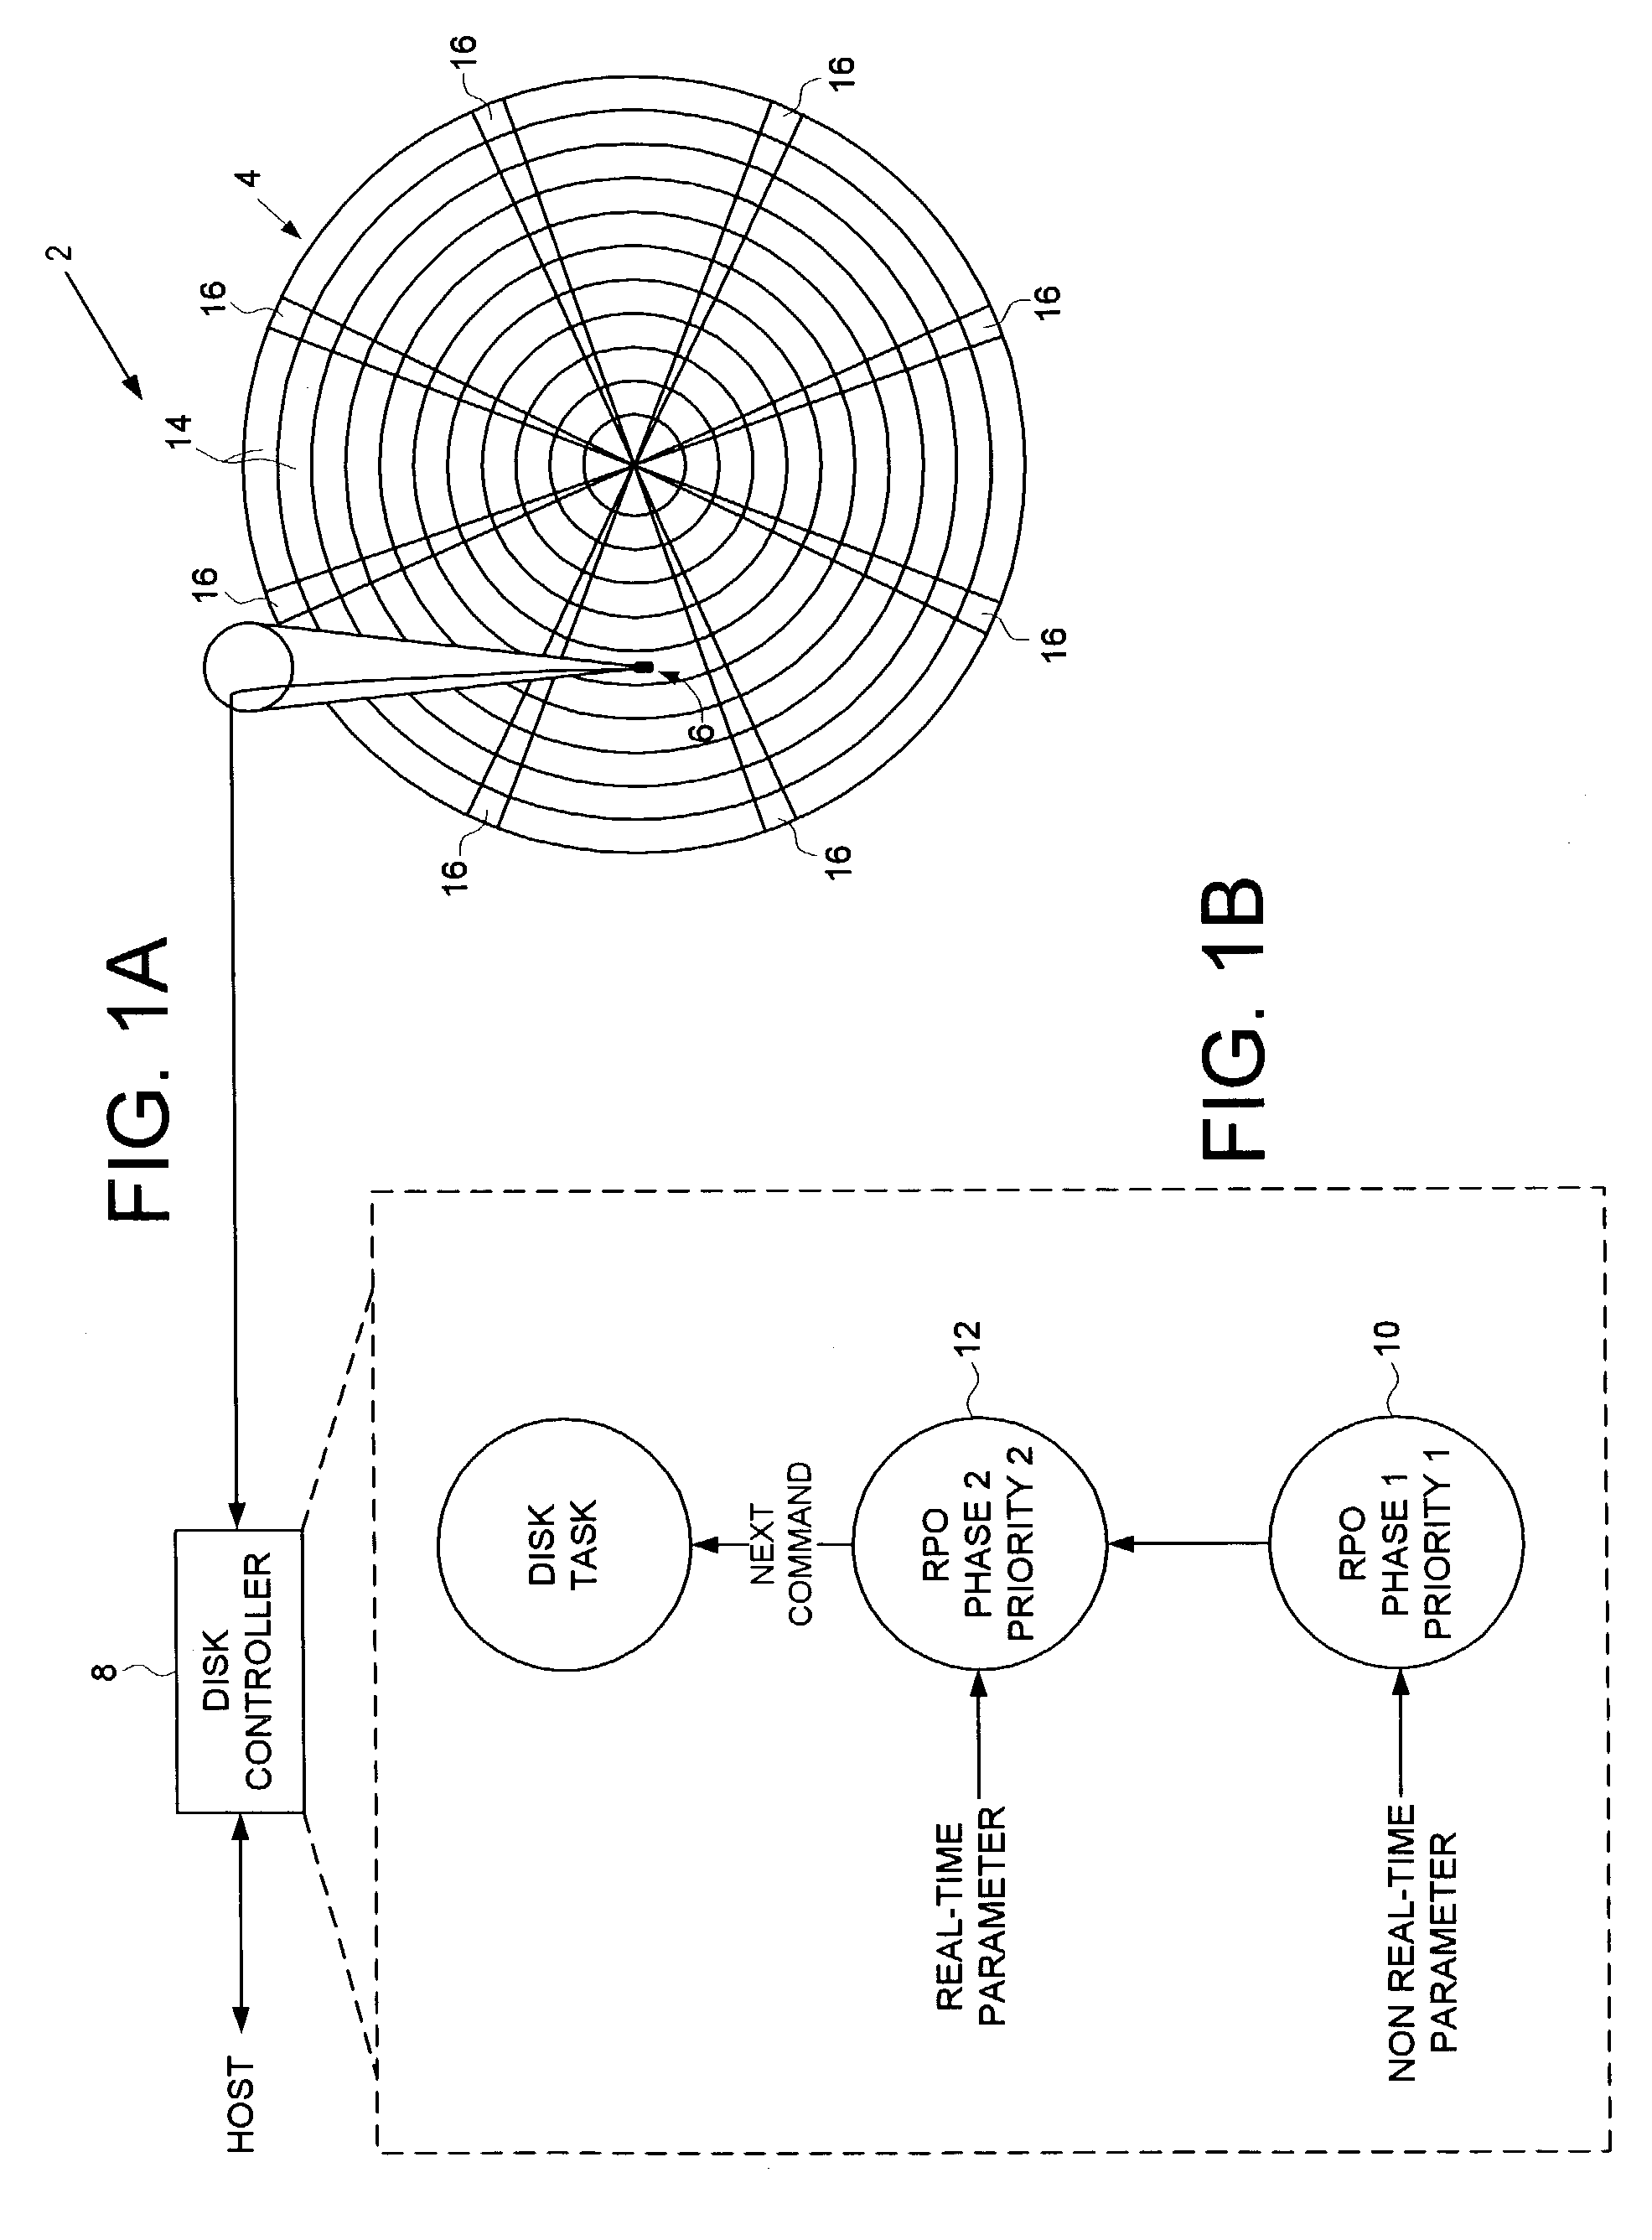 Disk drive employing a multi-phase rotational position optimization (RPO) algorithm